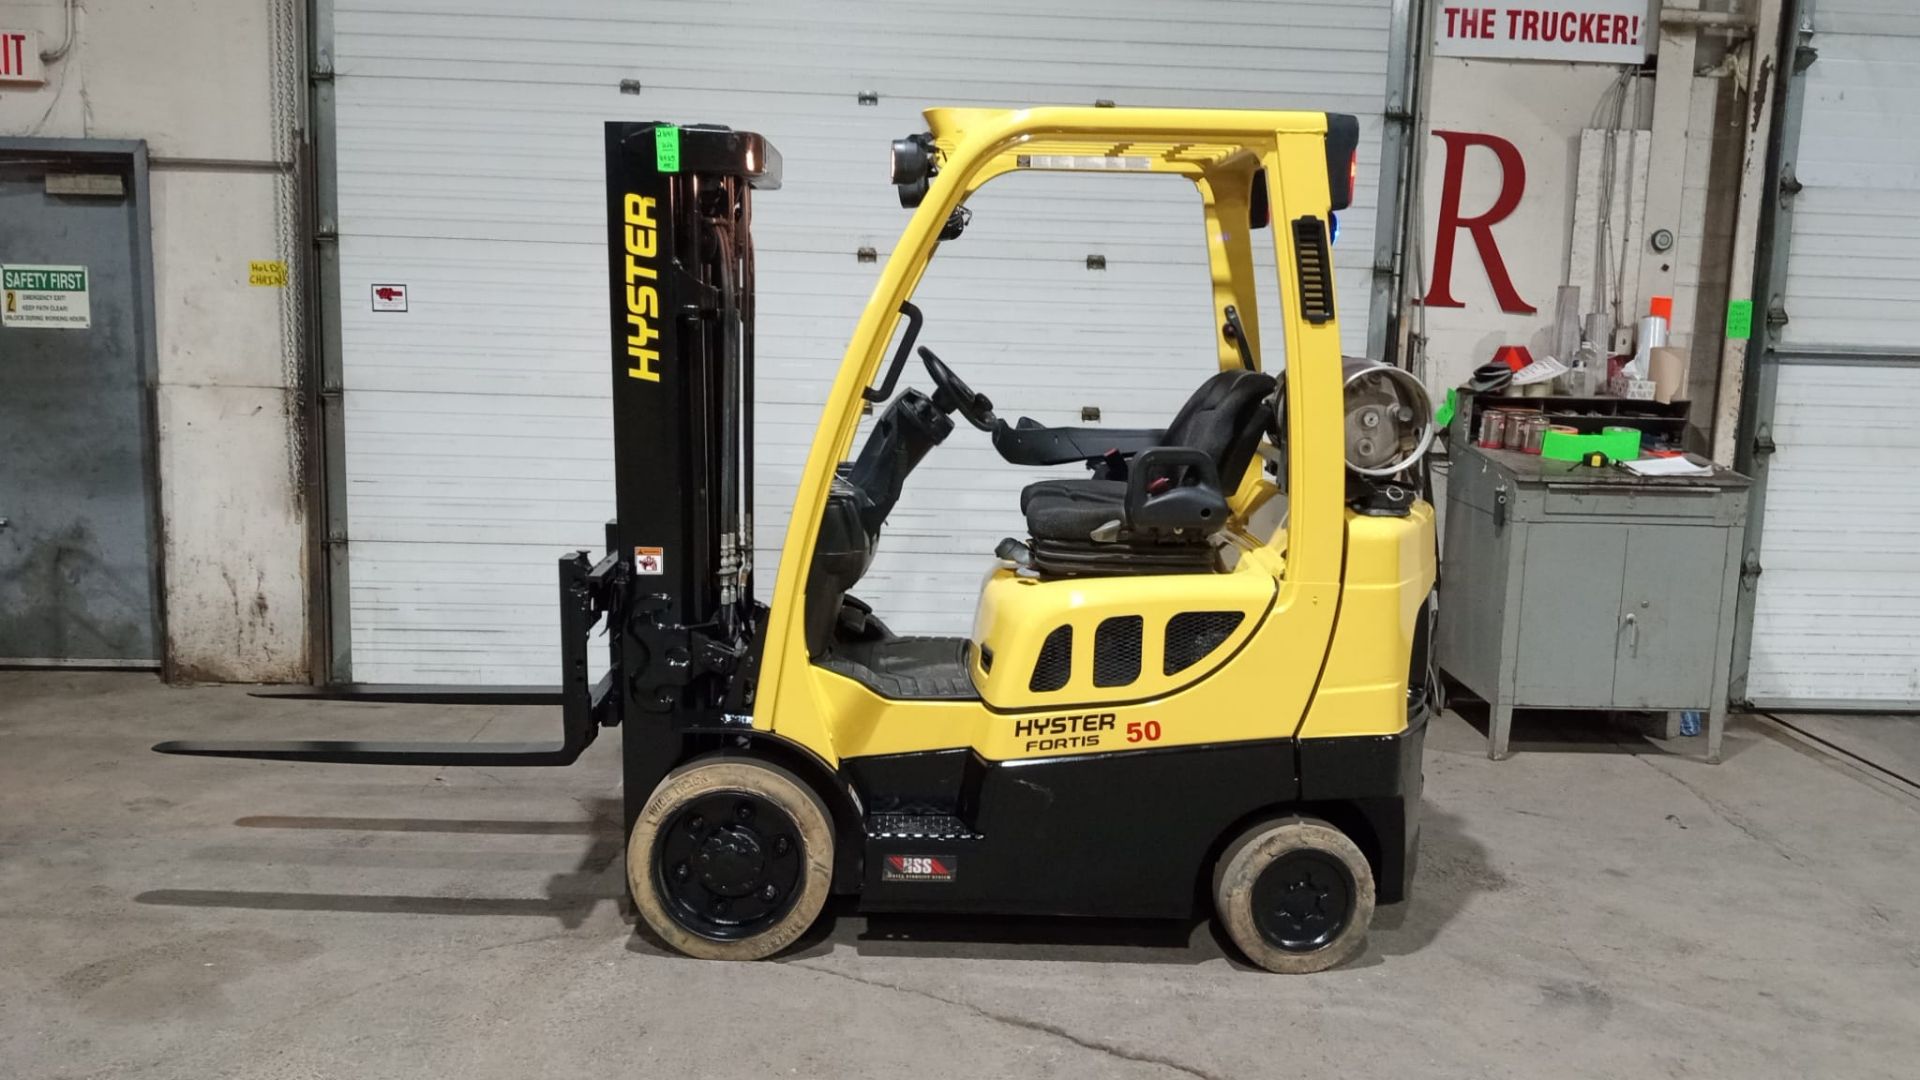 2016 HYSTER 5,000lbs Capacity LPG (Propane) Forklift with sideshift & 3-STAGE MAST & Non Marking